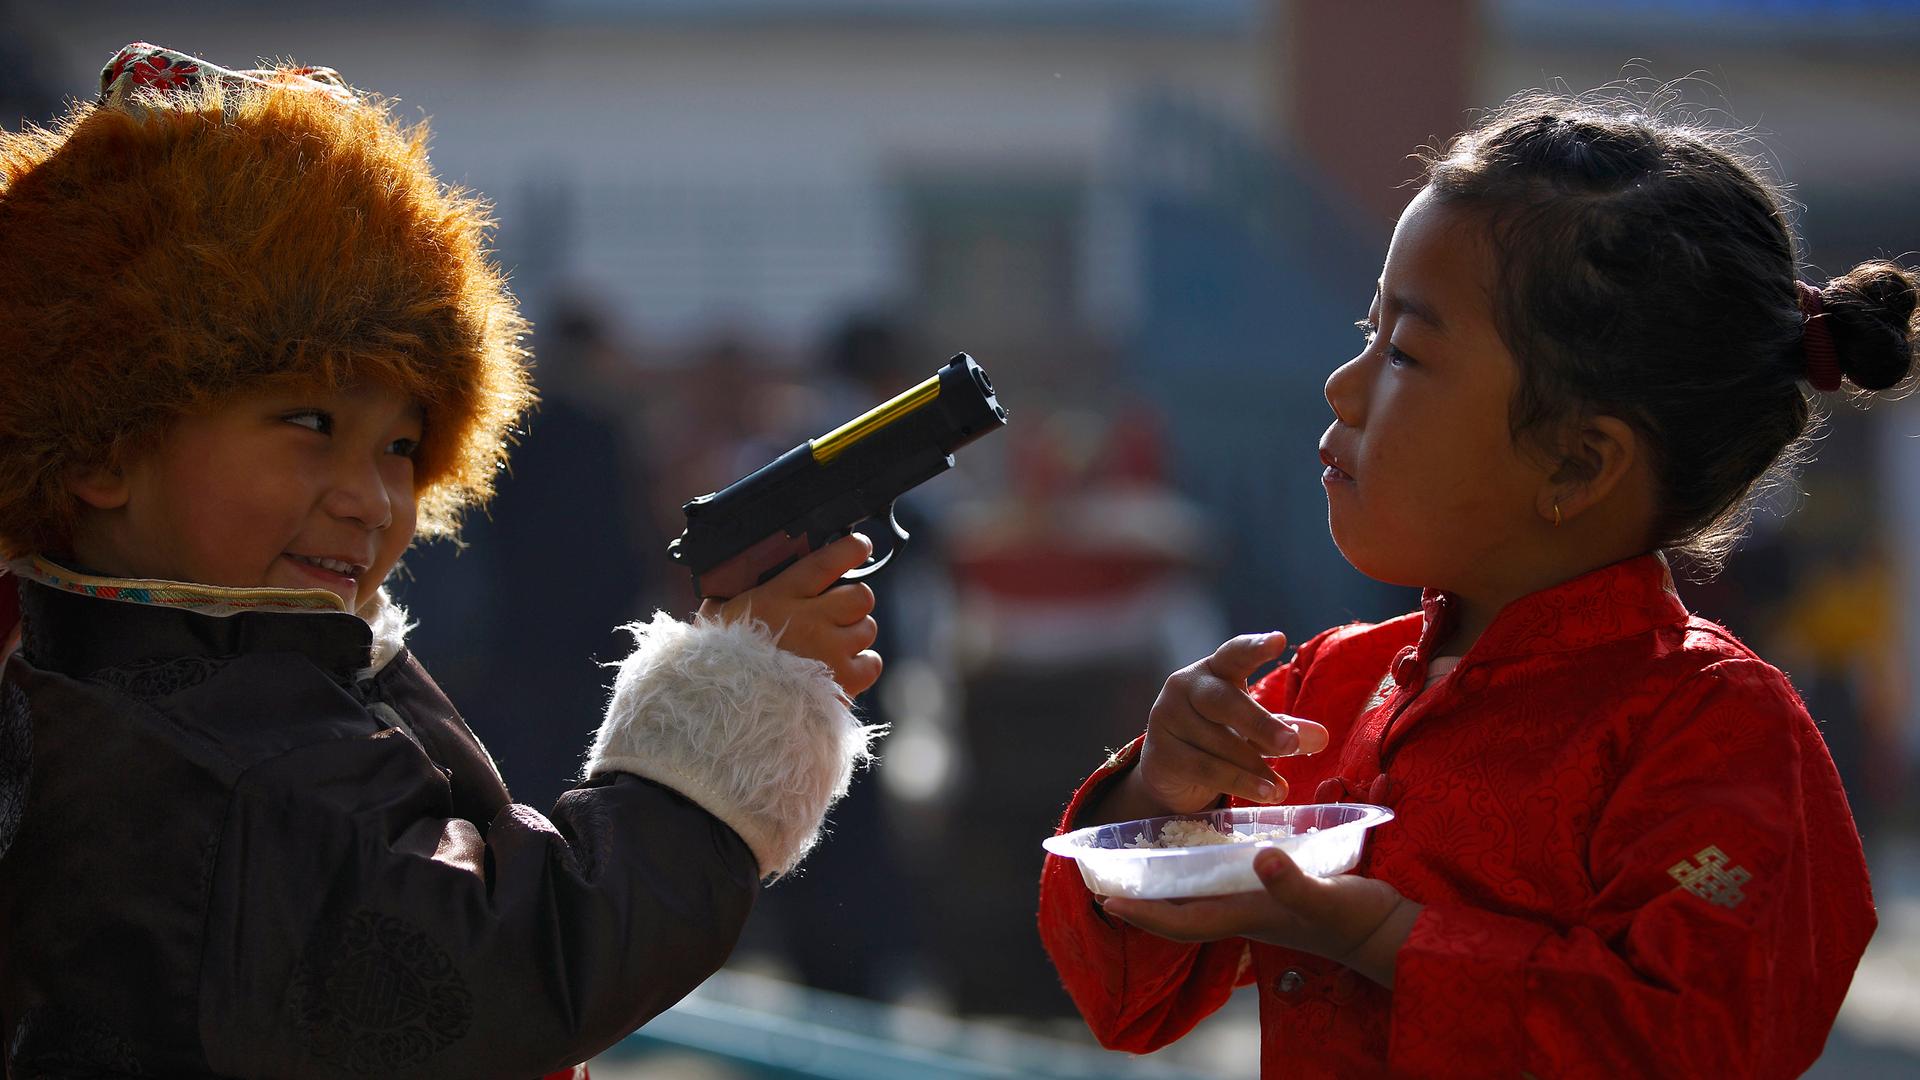 A Tibetan boy points a toy gun towards a girl during the function organized to mark "Losar" or the Tibetan New Year at a Tibetan Refugee Camp in Lalitpur.